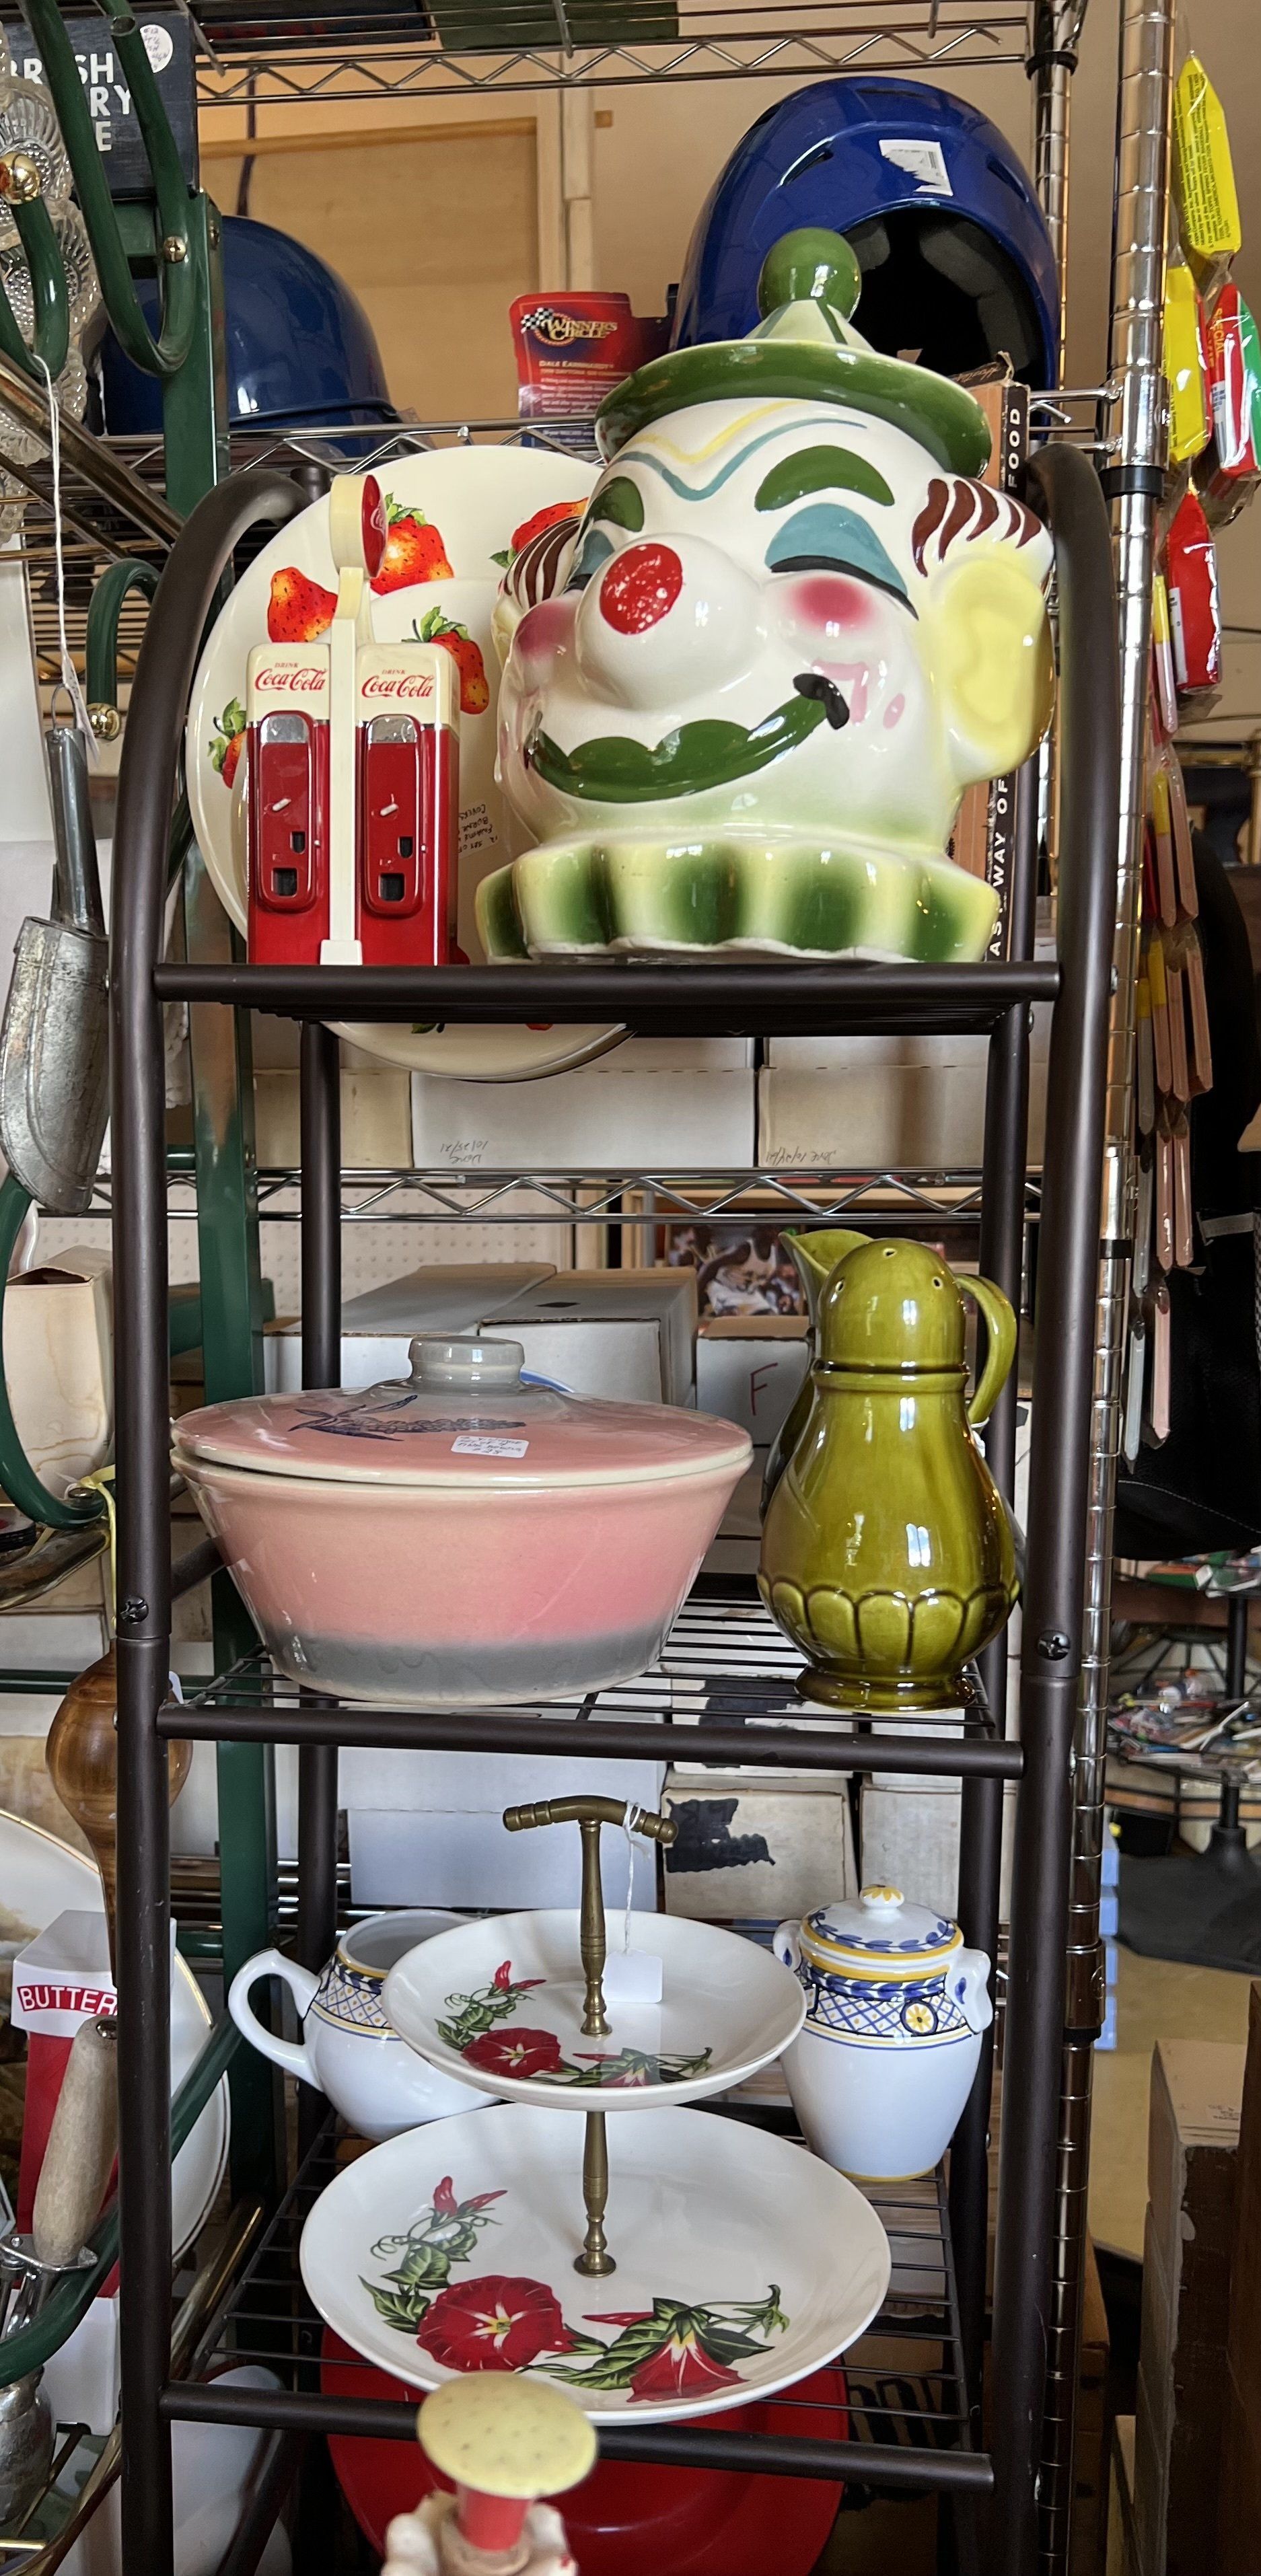 Mid-Century Modern at Victorian Rose Vintage Antiques in Bouckville, NY